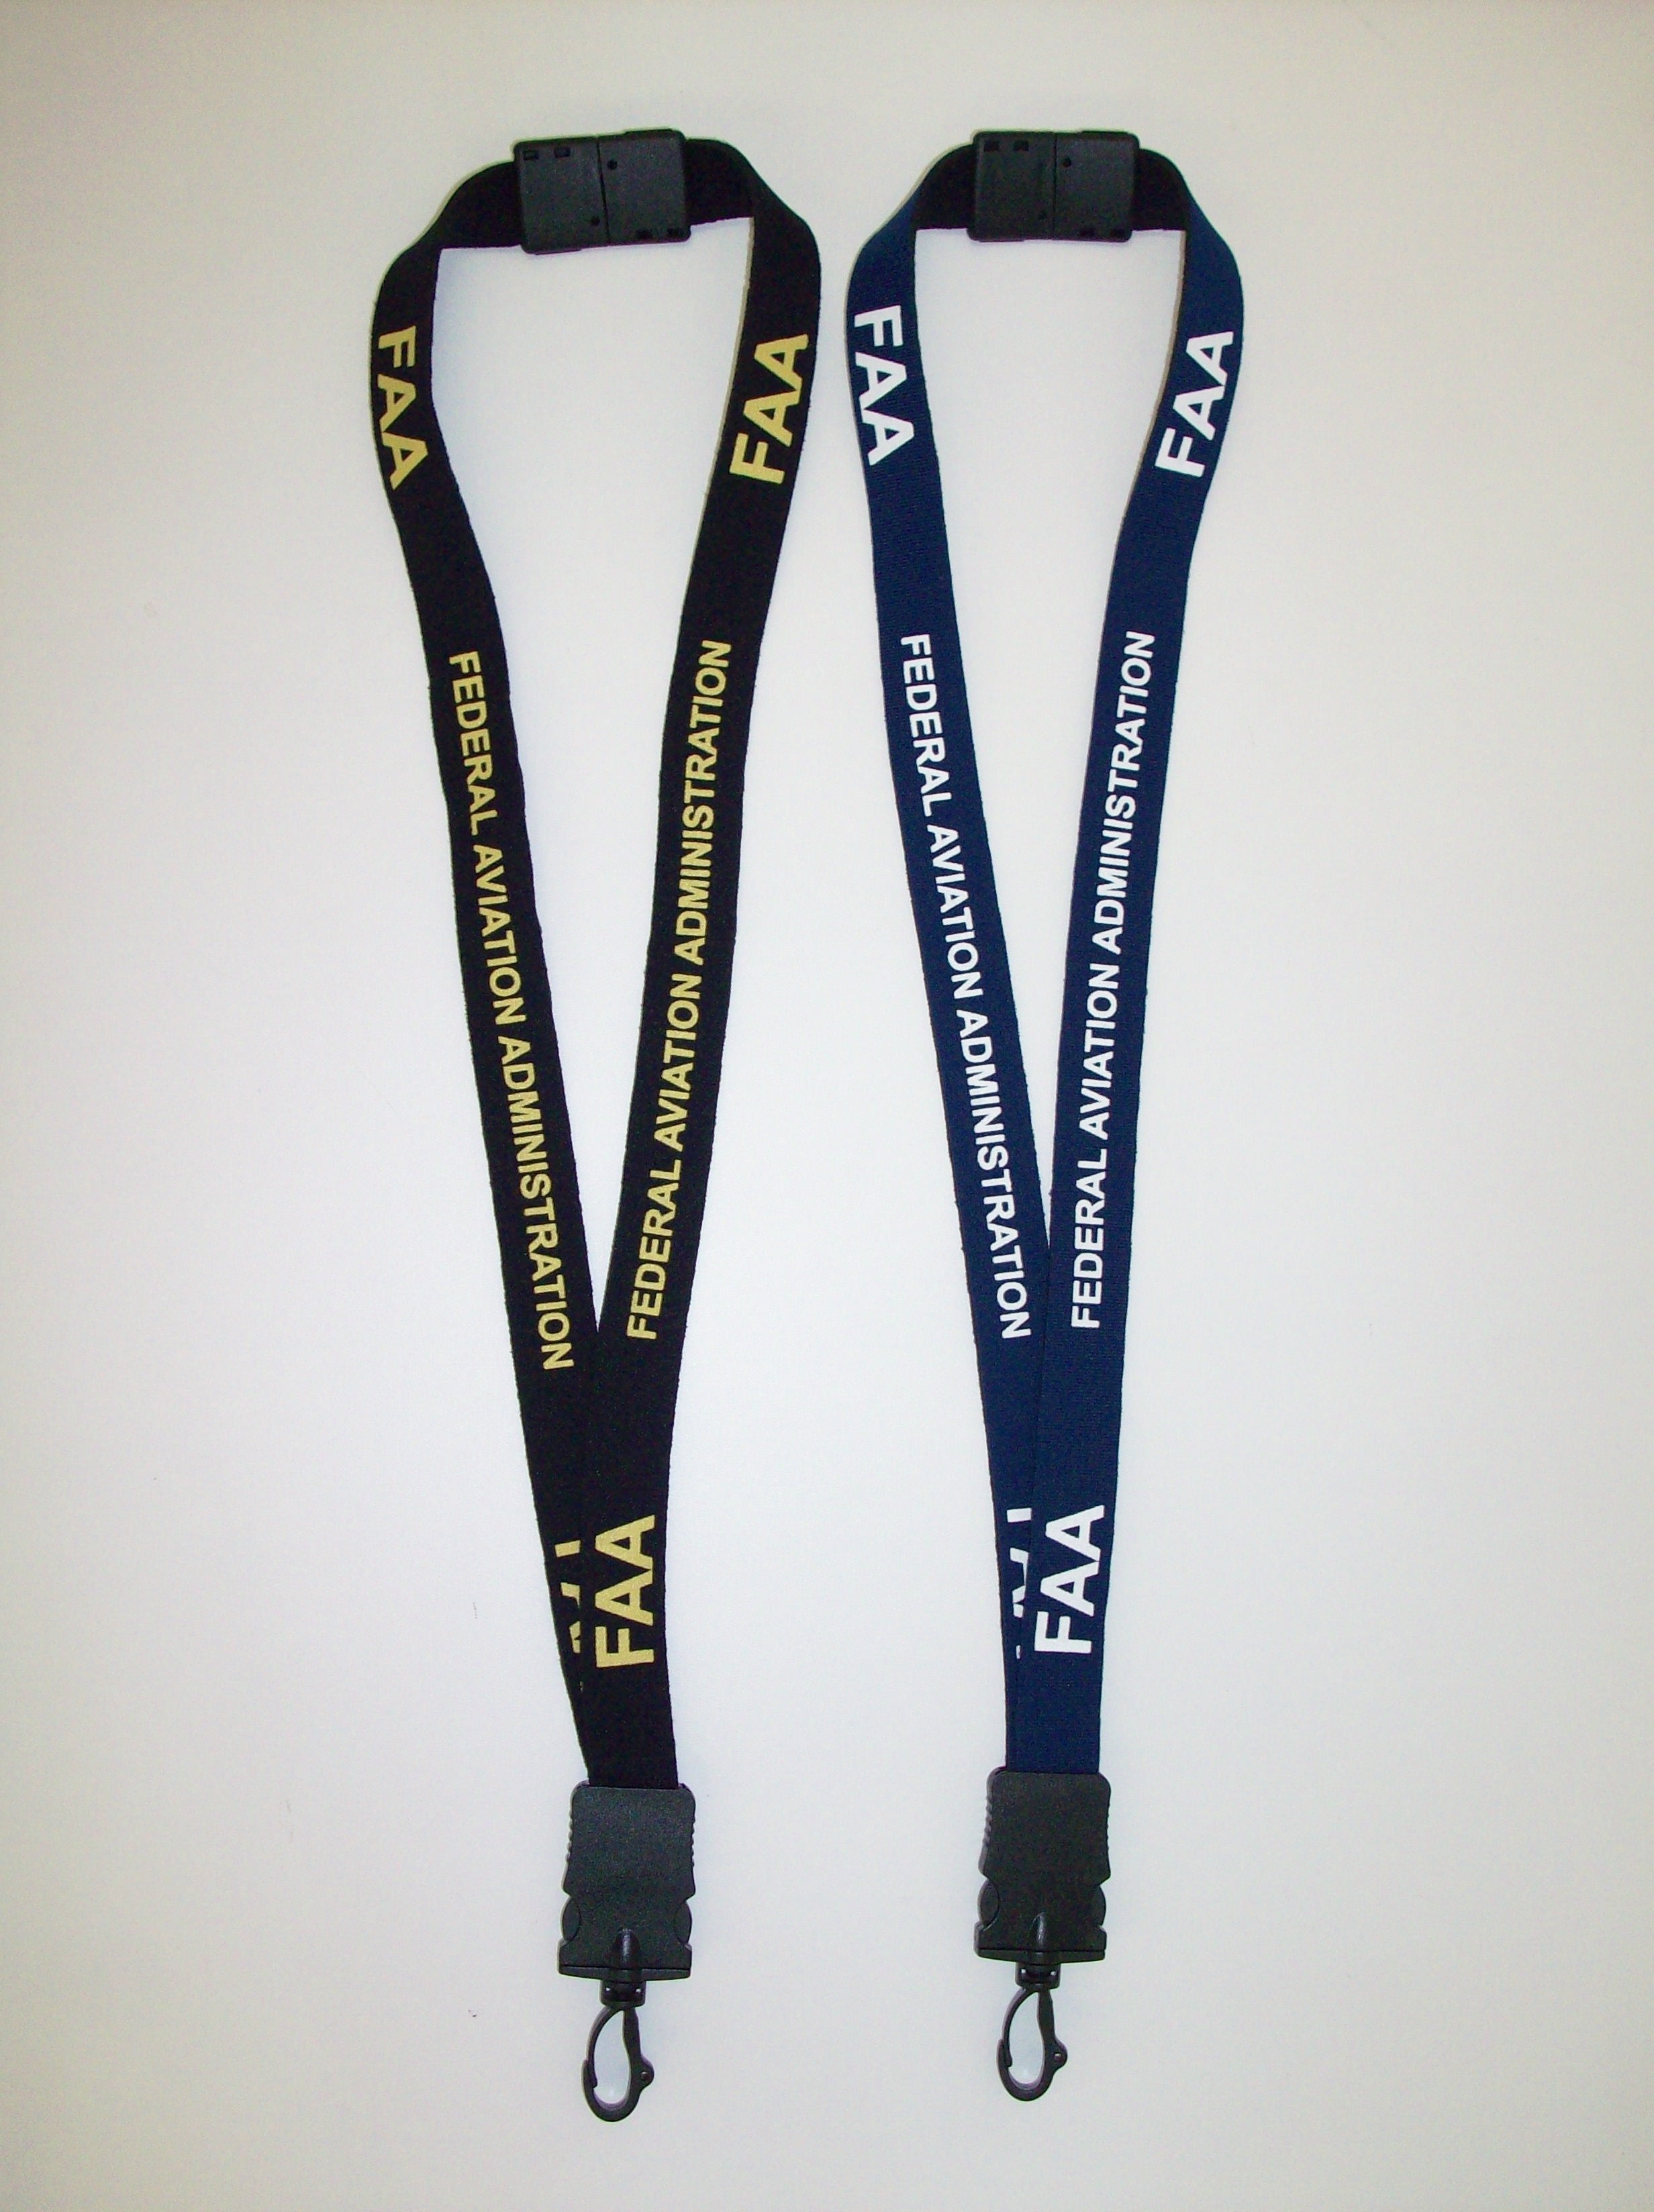 Lanyard FAA Neoprene with Safety Release